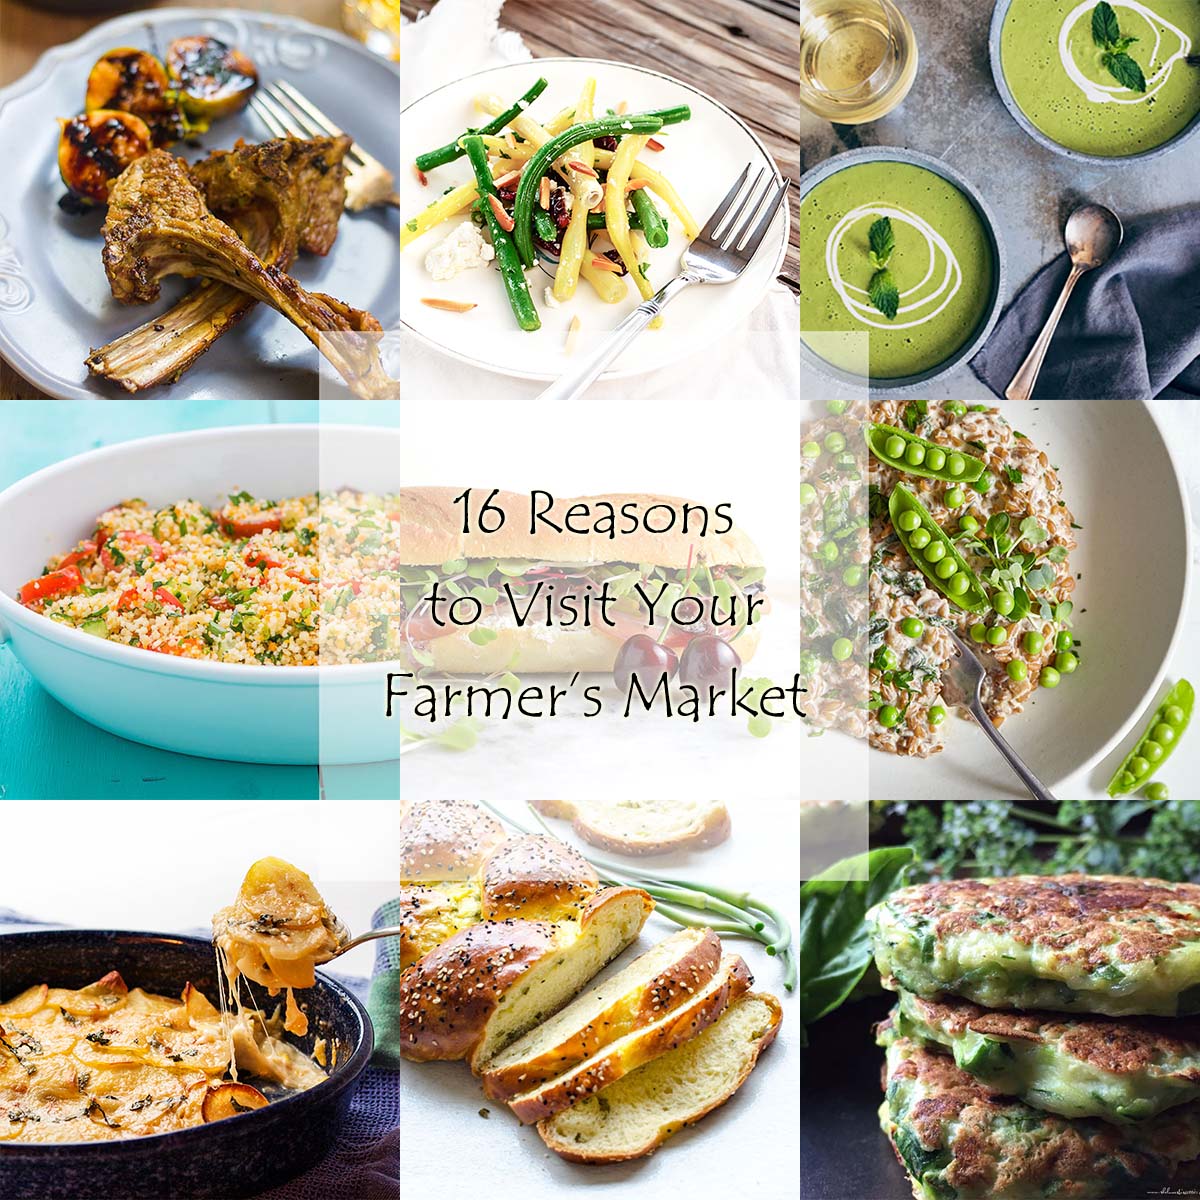 Farmer's Market Roundup - This roundup features 16 wonderful and tasty reasons to visit your local farmer's market and fill up on fresh produce. | justalittlebitofbacon.com